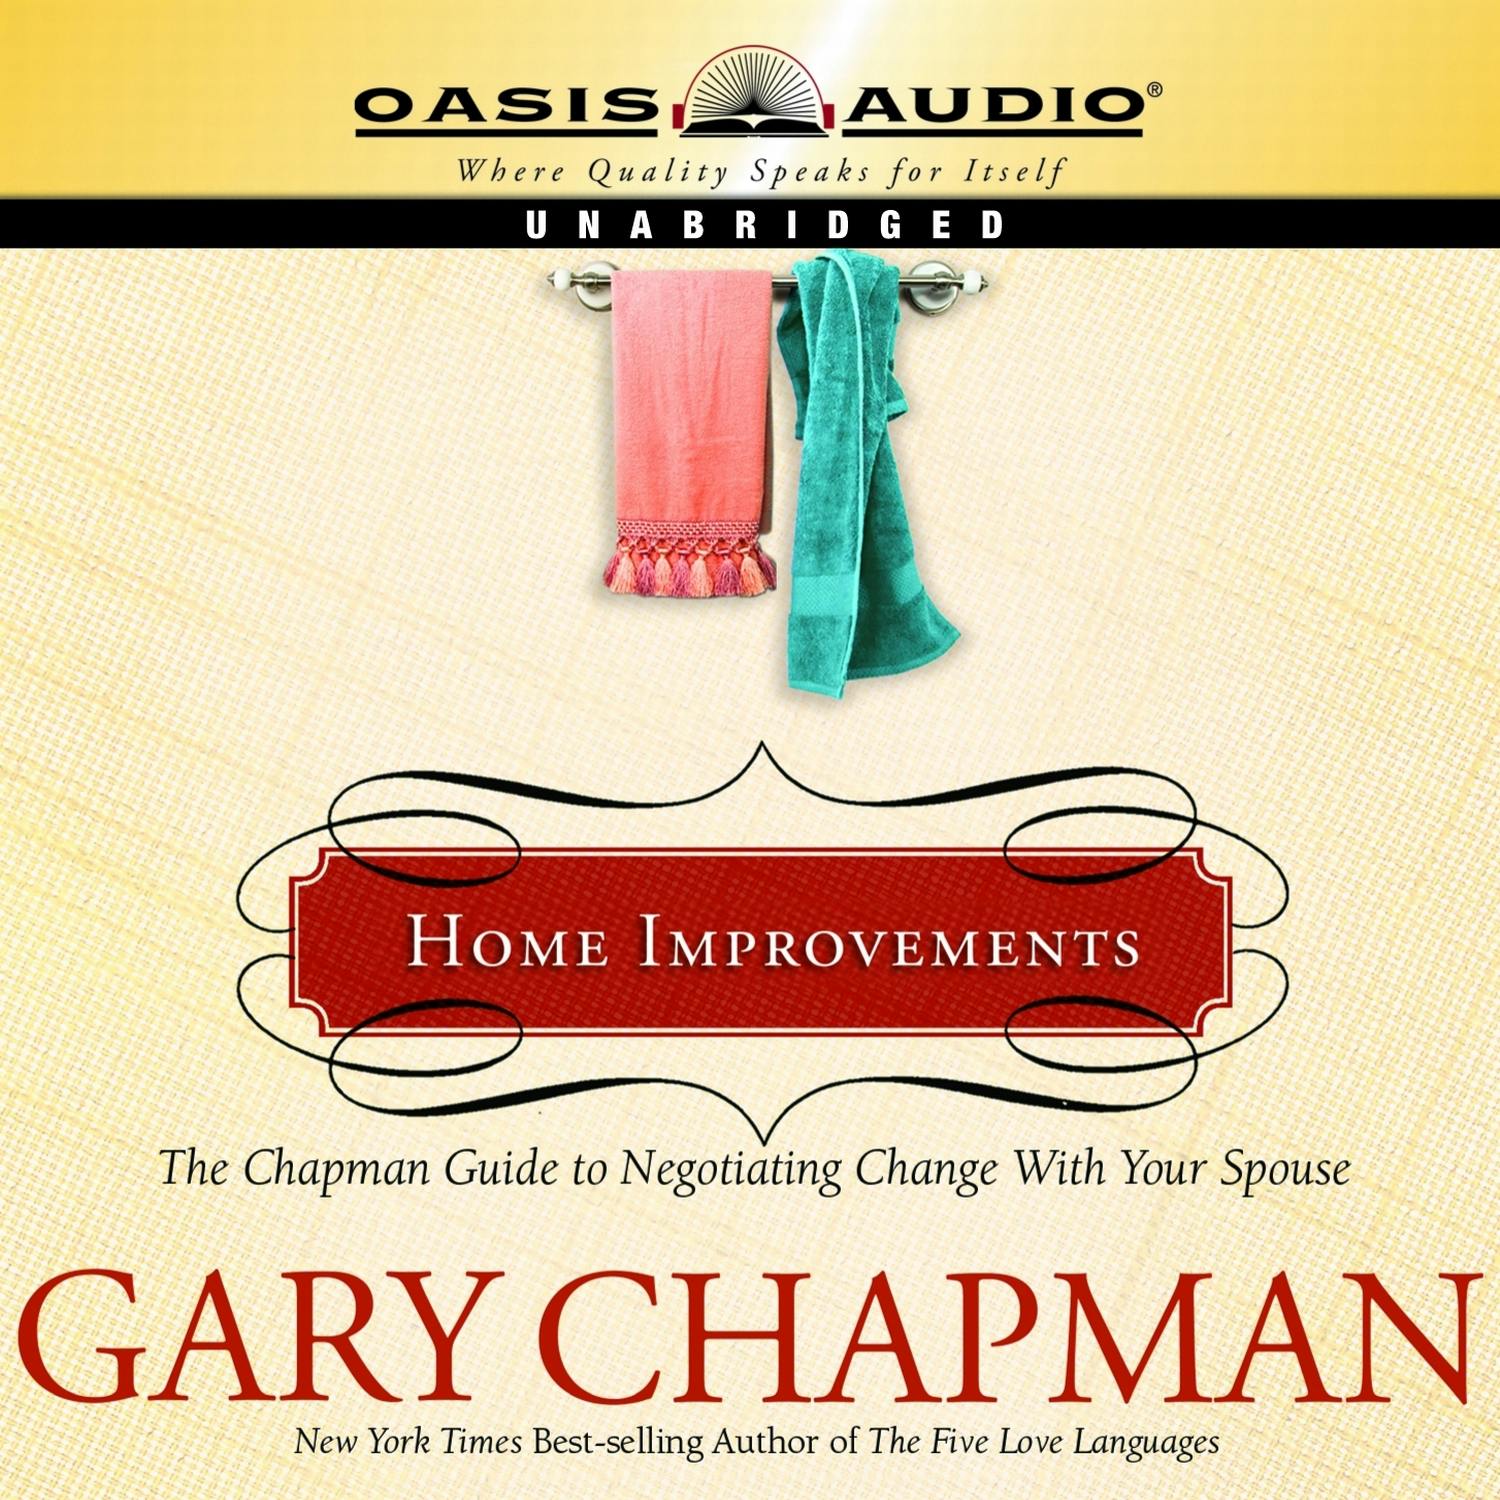 Home Improvements: The Chapman Guide to Negotiating Change With Your Spouse - Gary Chapman